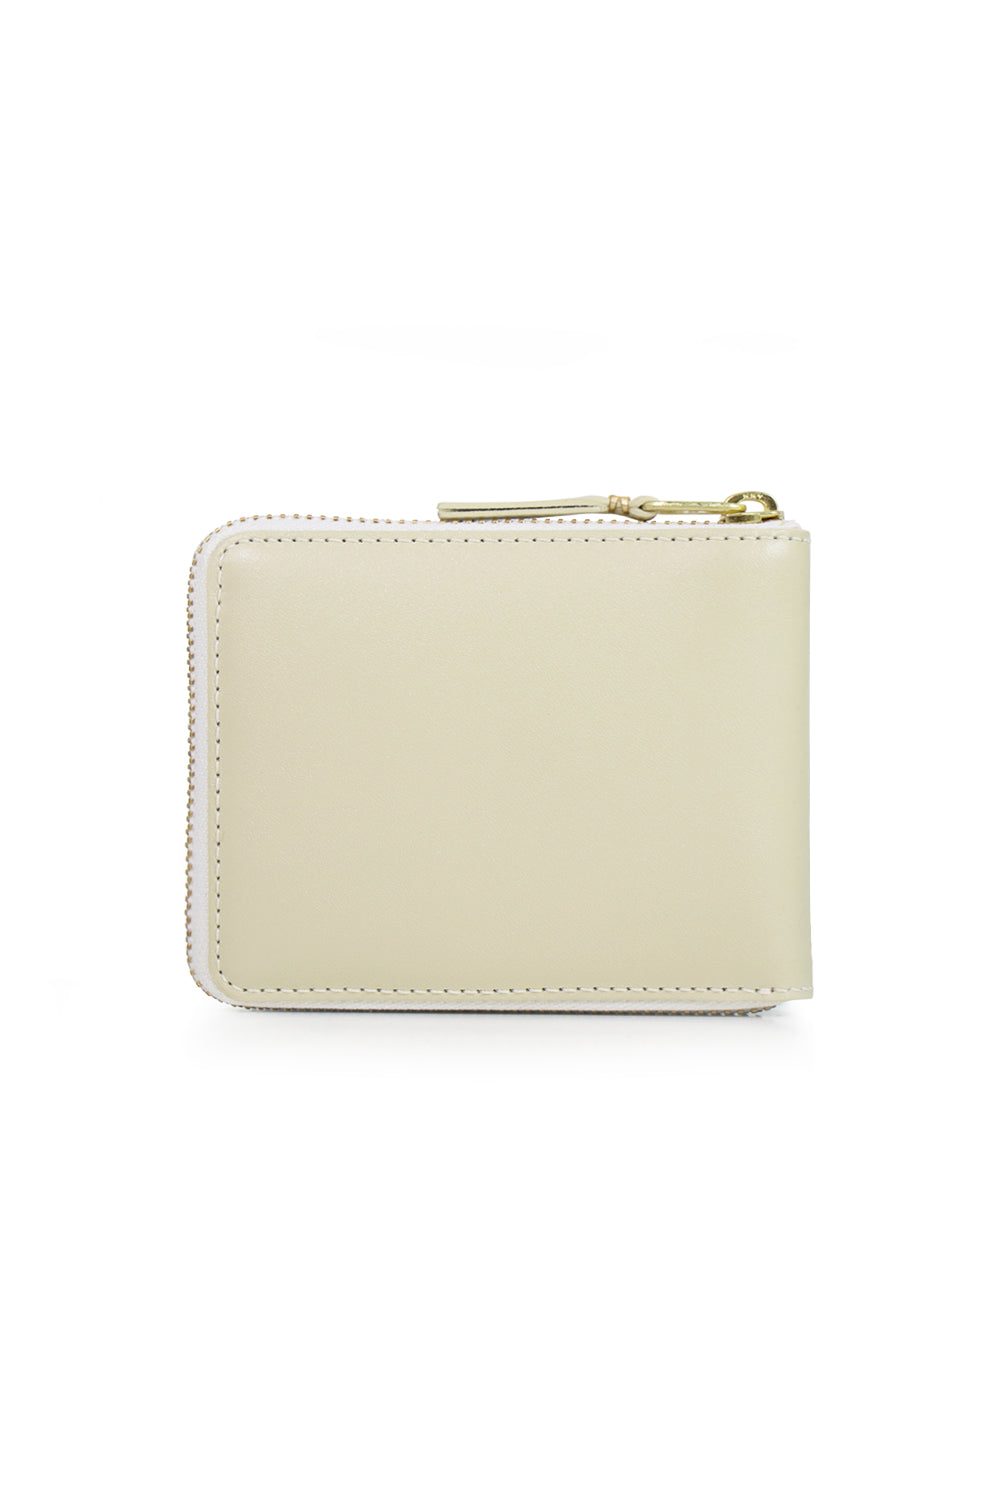 COMME DES GARCONS BAGS WHITE CLASSIC LEATHER ZIP WALLET | OFF WHITE